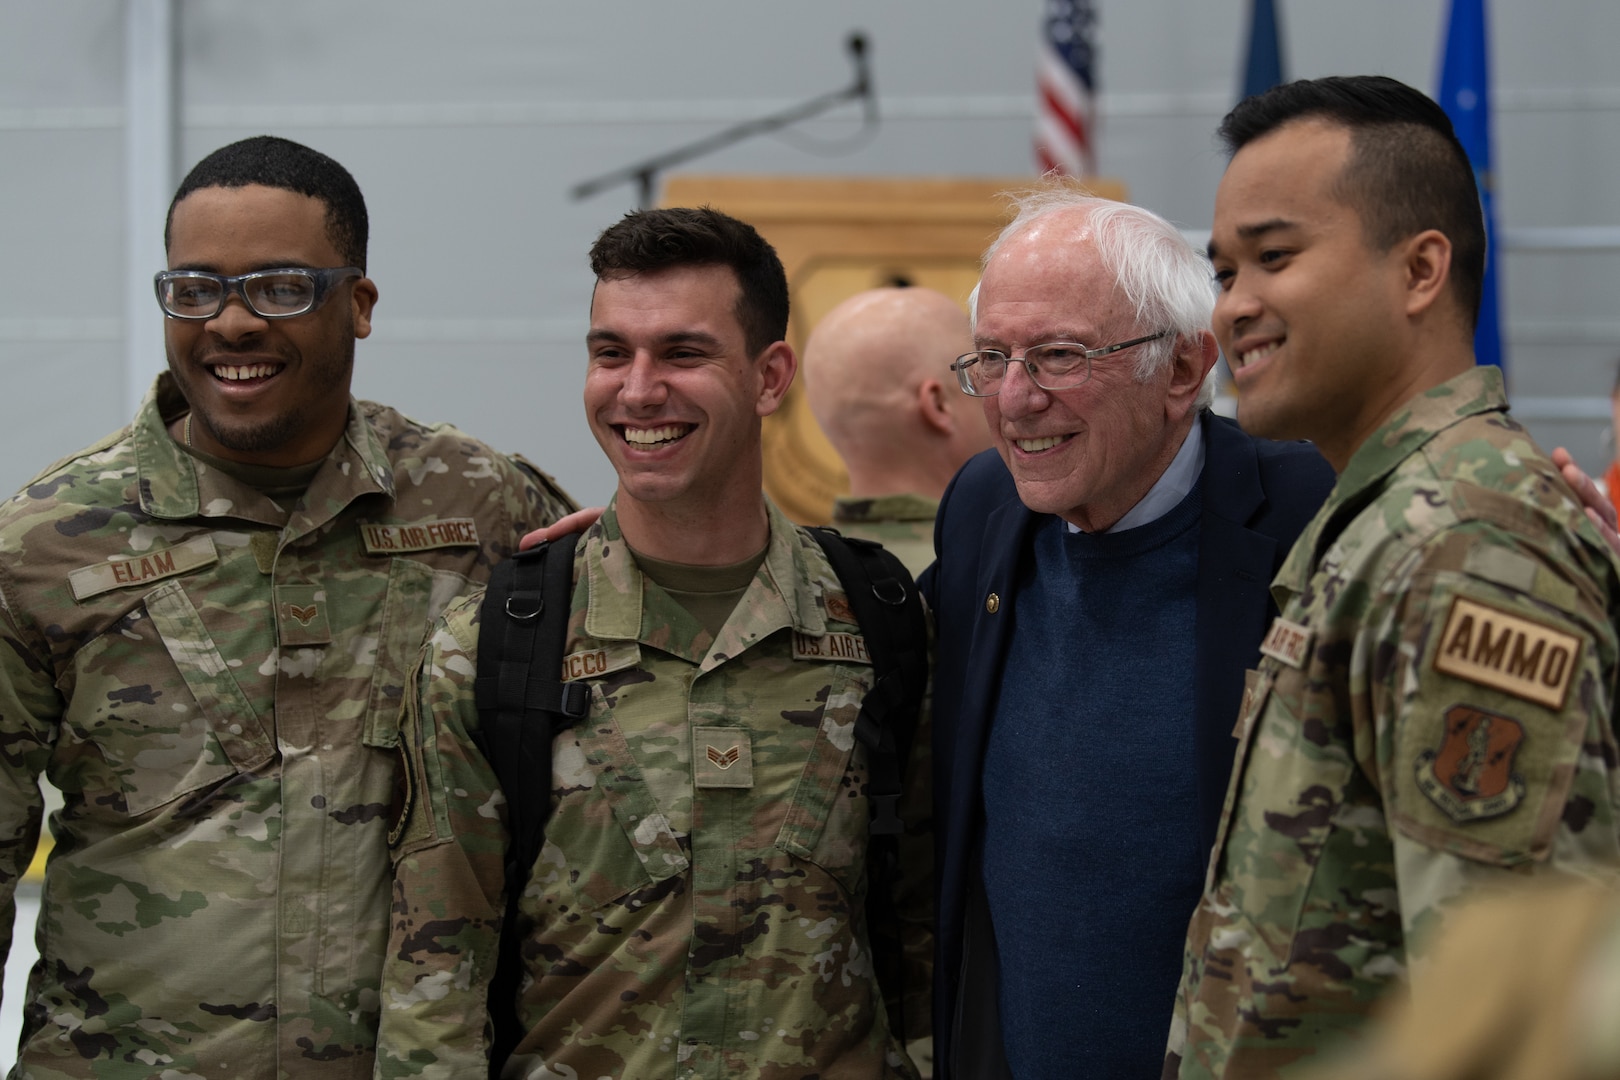 Vermont Senator Bernie Sanders poses with members of the 158th Fighter Wing and their families during a deployment ceremony at the Vermont Air National Guard Base, South Burlington, Vermont, Thursday, April 28th, 2022. The ceremony recognizes the sacrifices of Airmen and their families ahead of the 158th fighter wing’s deployment to Europe. (U.S. Air Force photo by Tech. Sgt. Richard Mekkri)